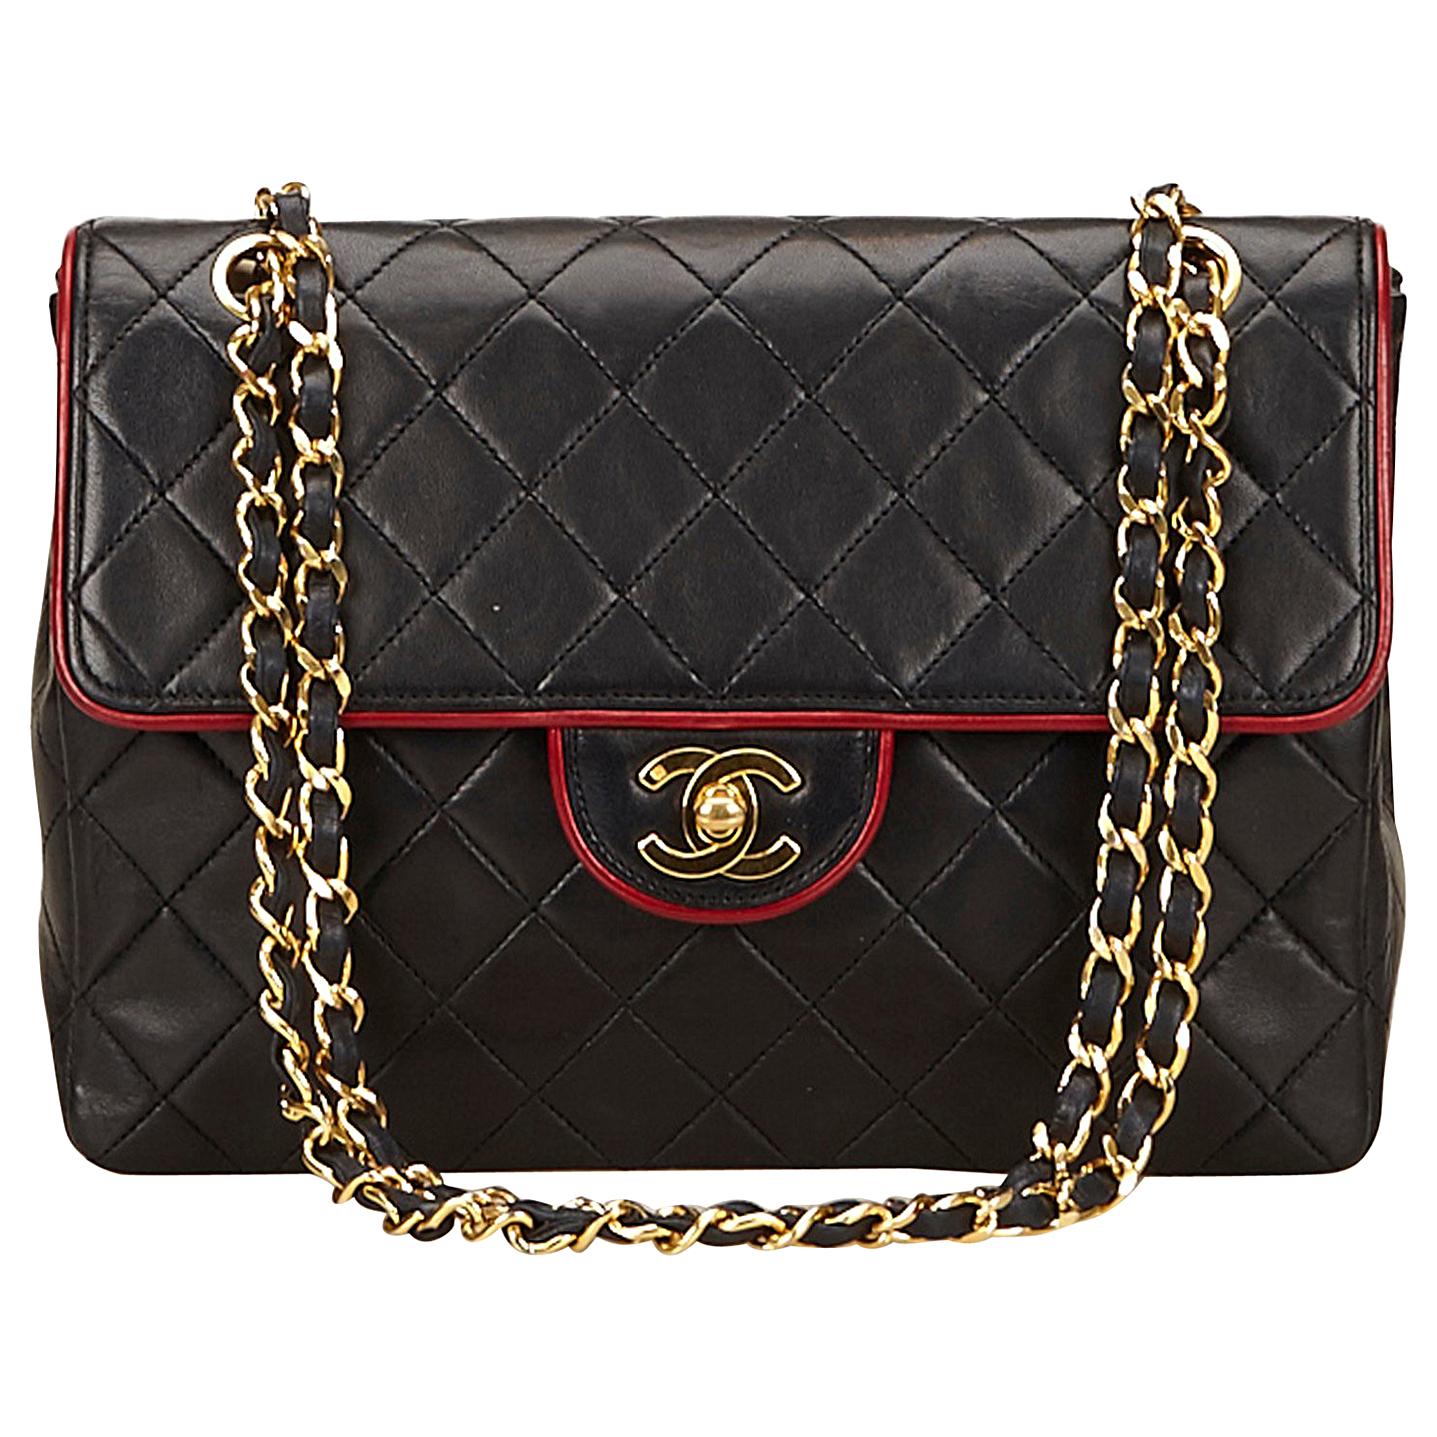 Chanel Quilted Leather Flap Bag